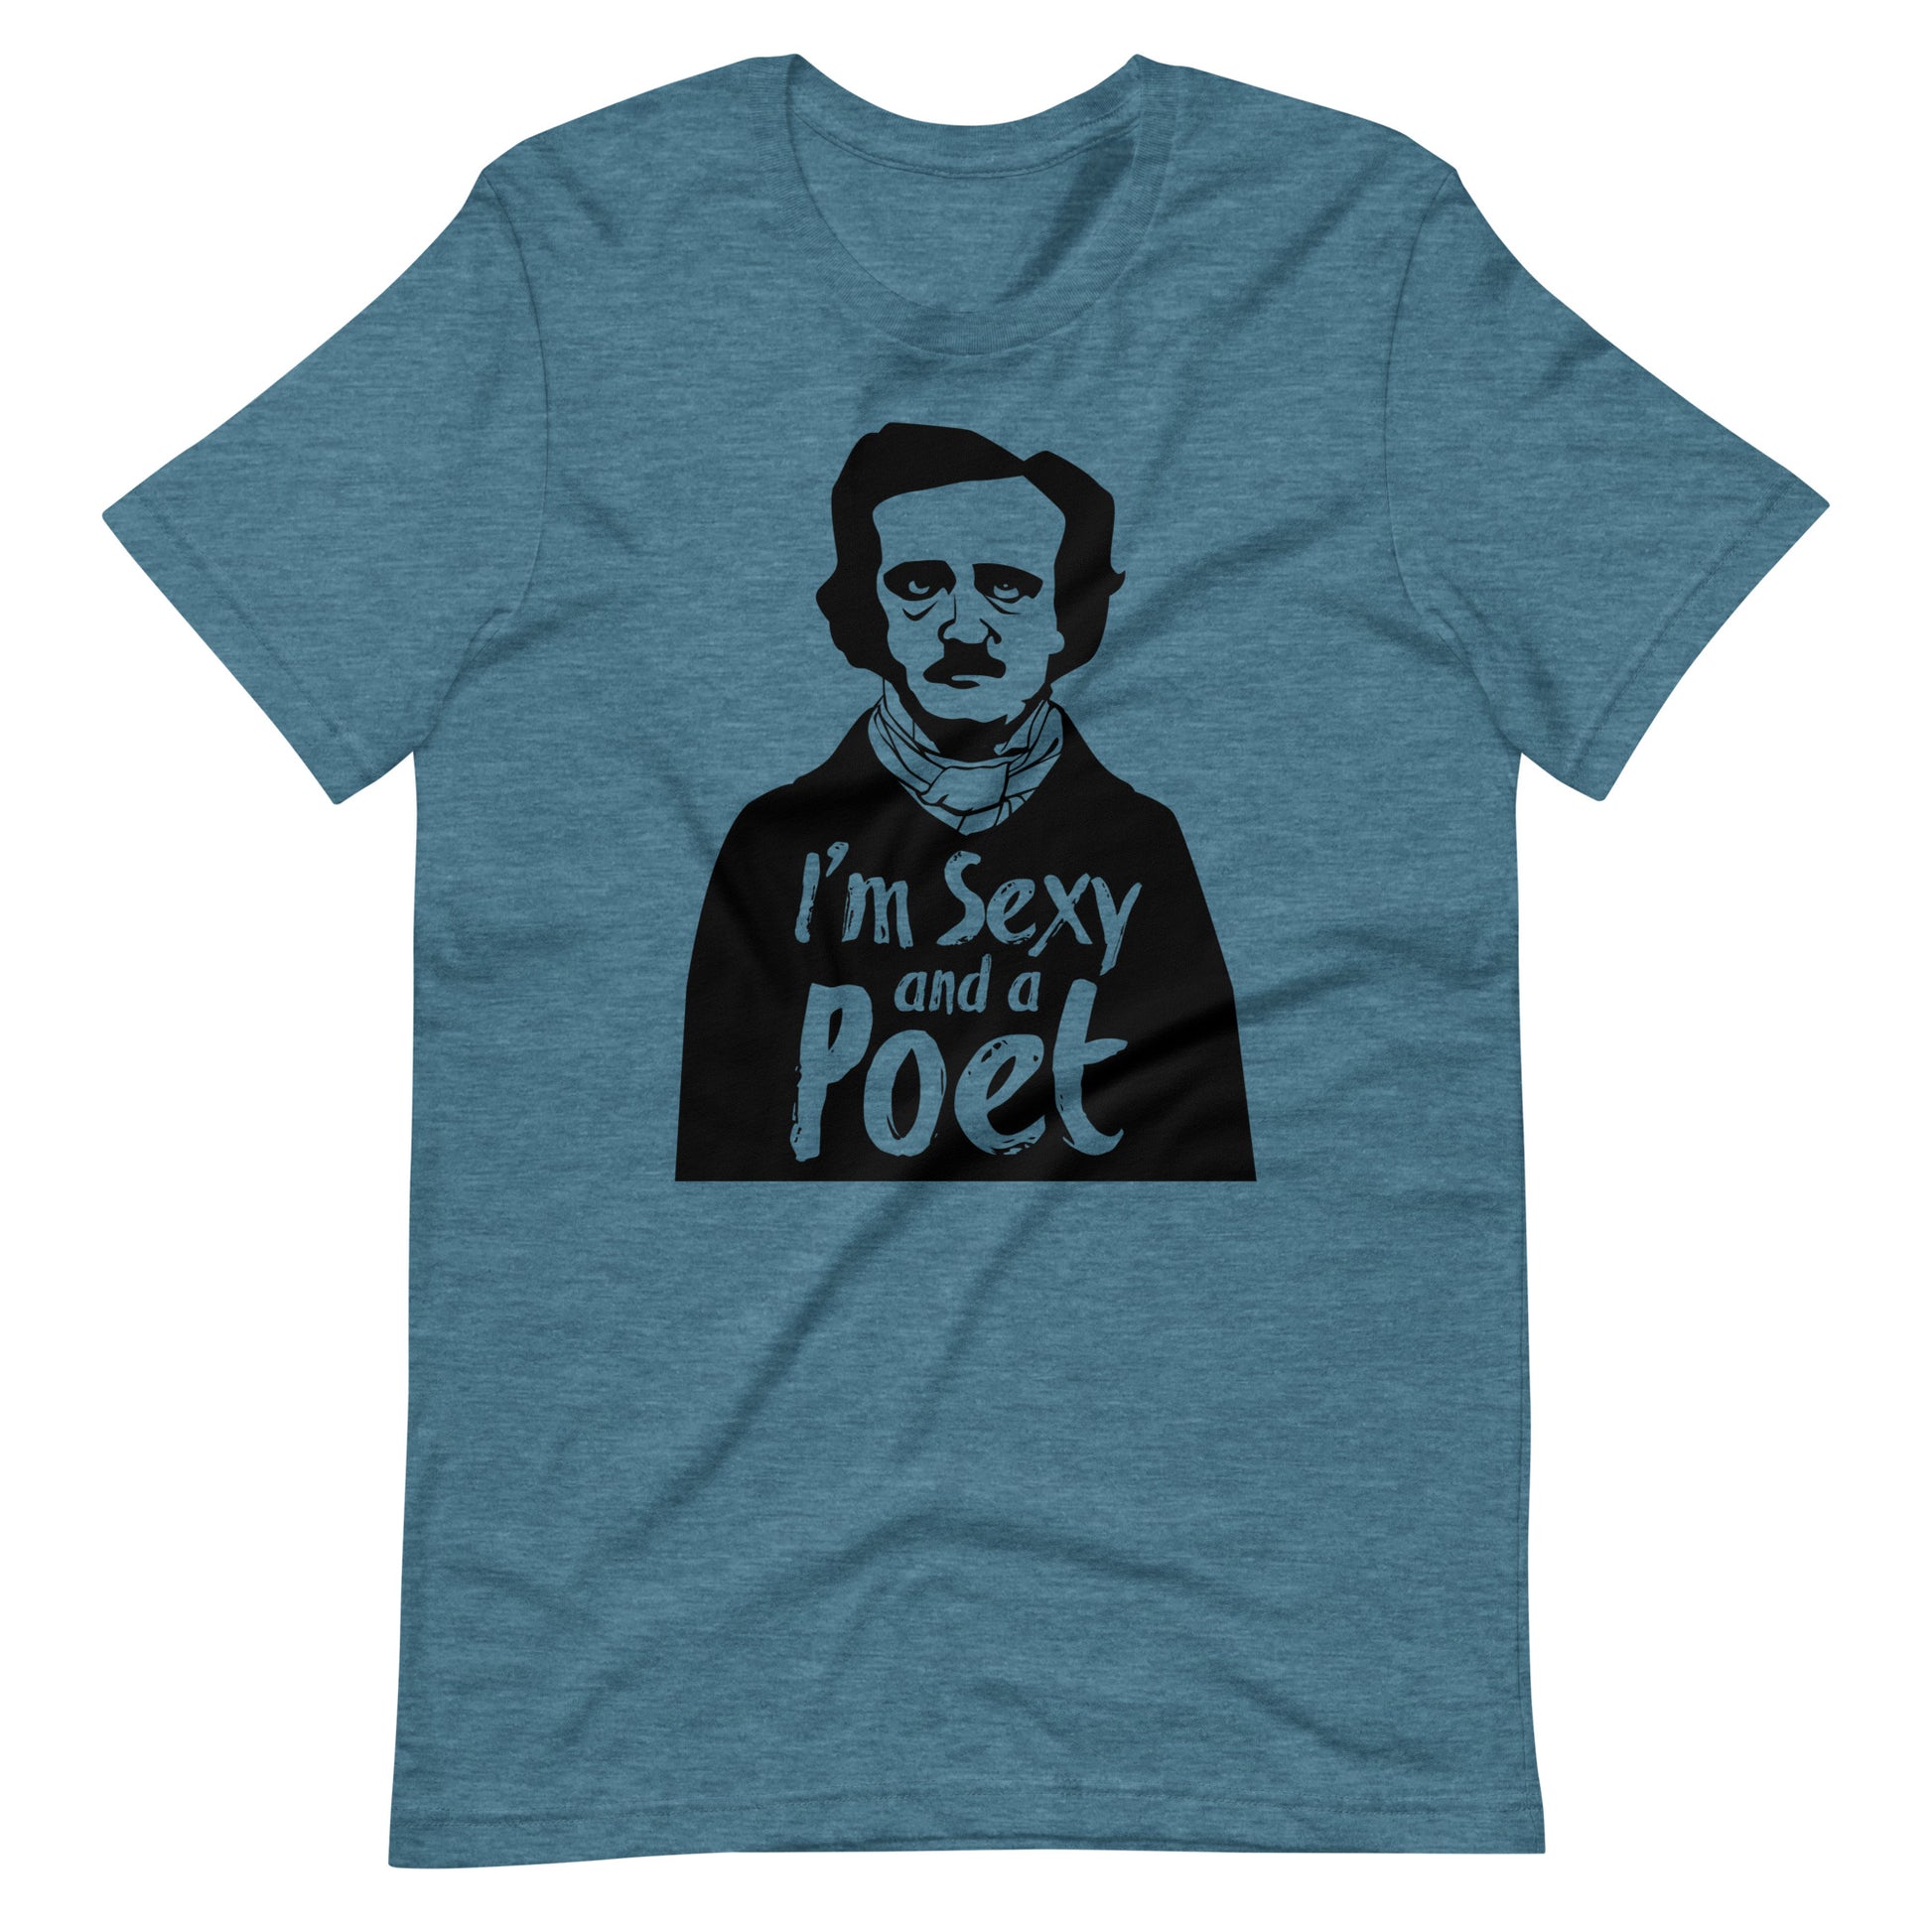 Women's Edgar Allan Poe "I'm Sexy and a Poet" t-shirt - Heather Deep Teal Front